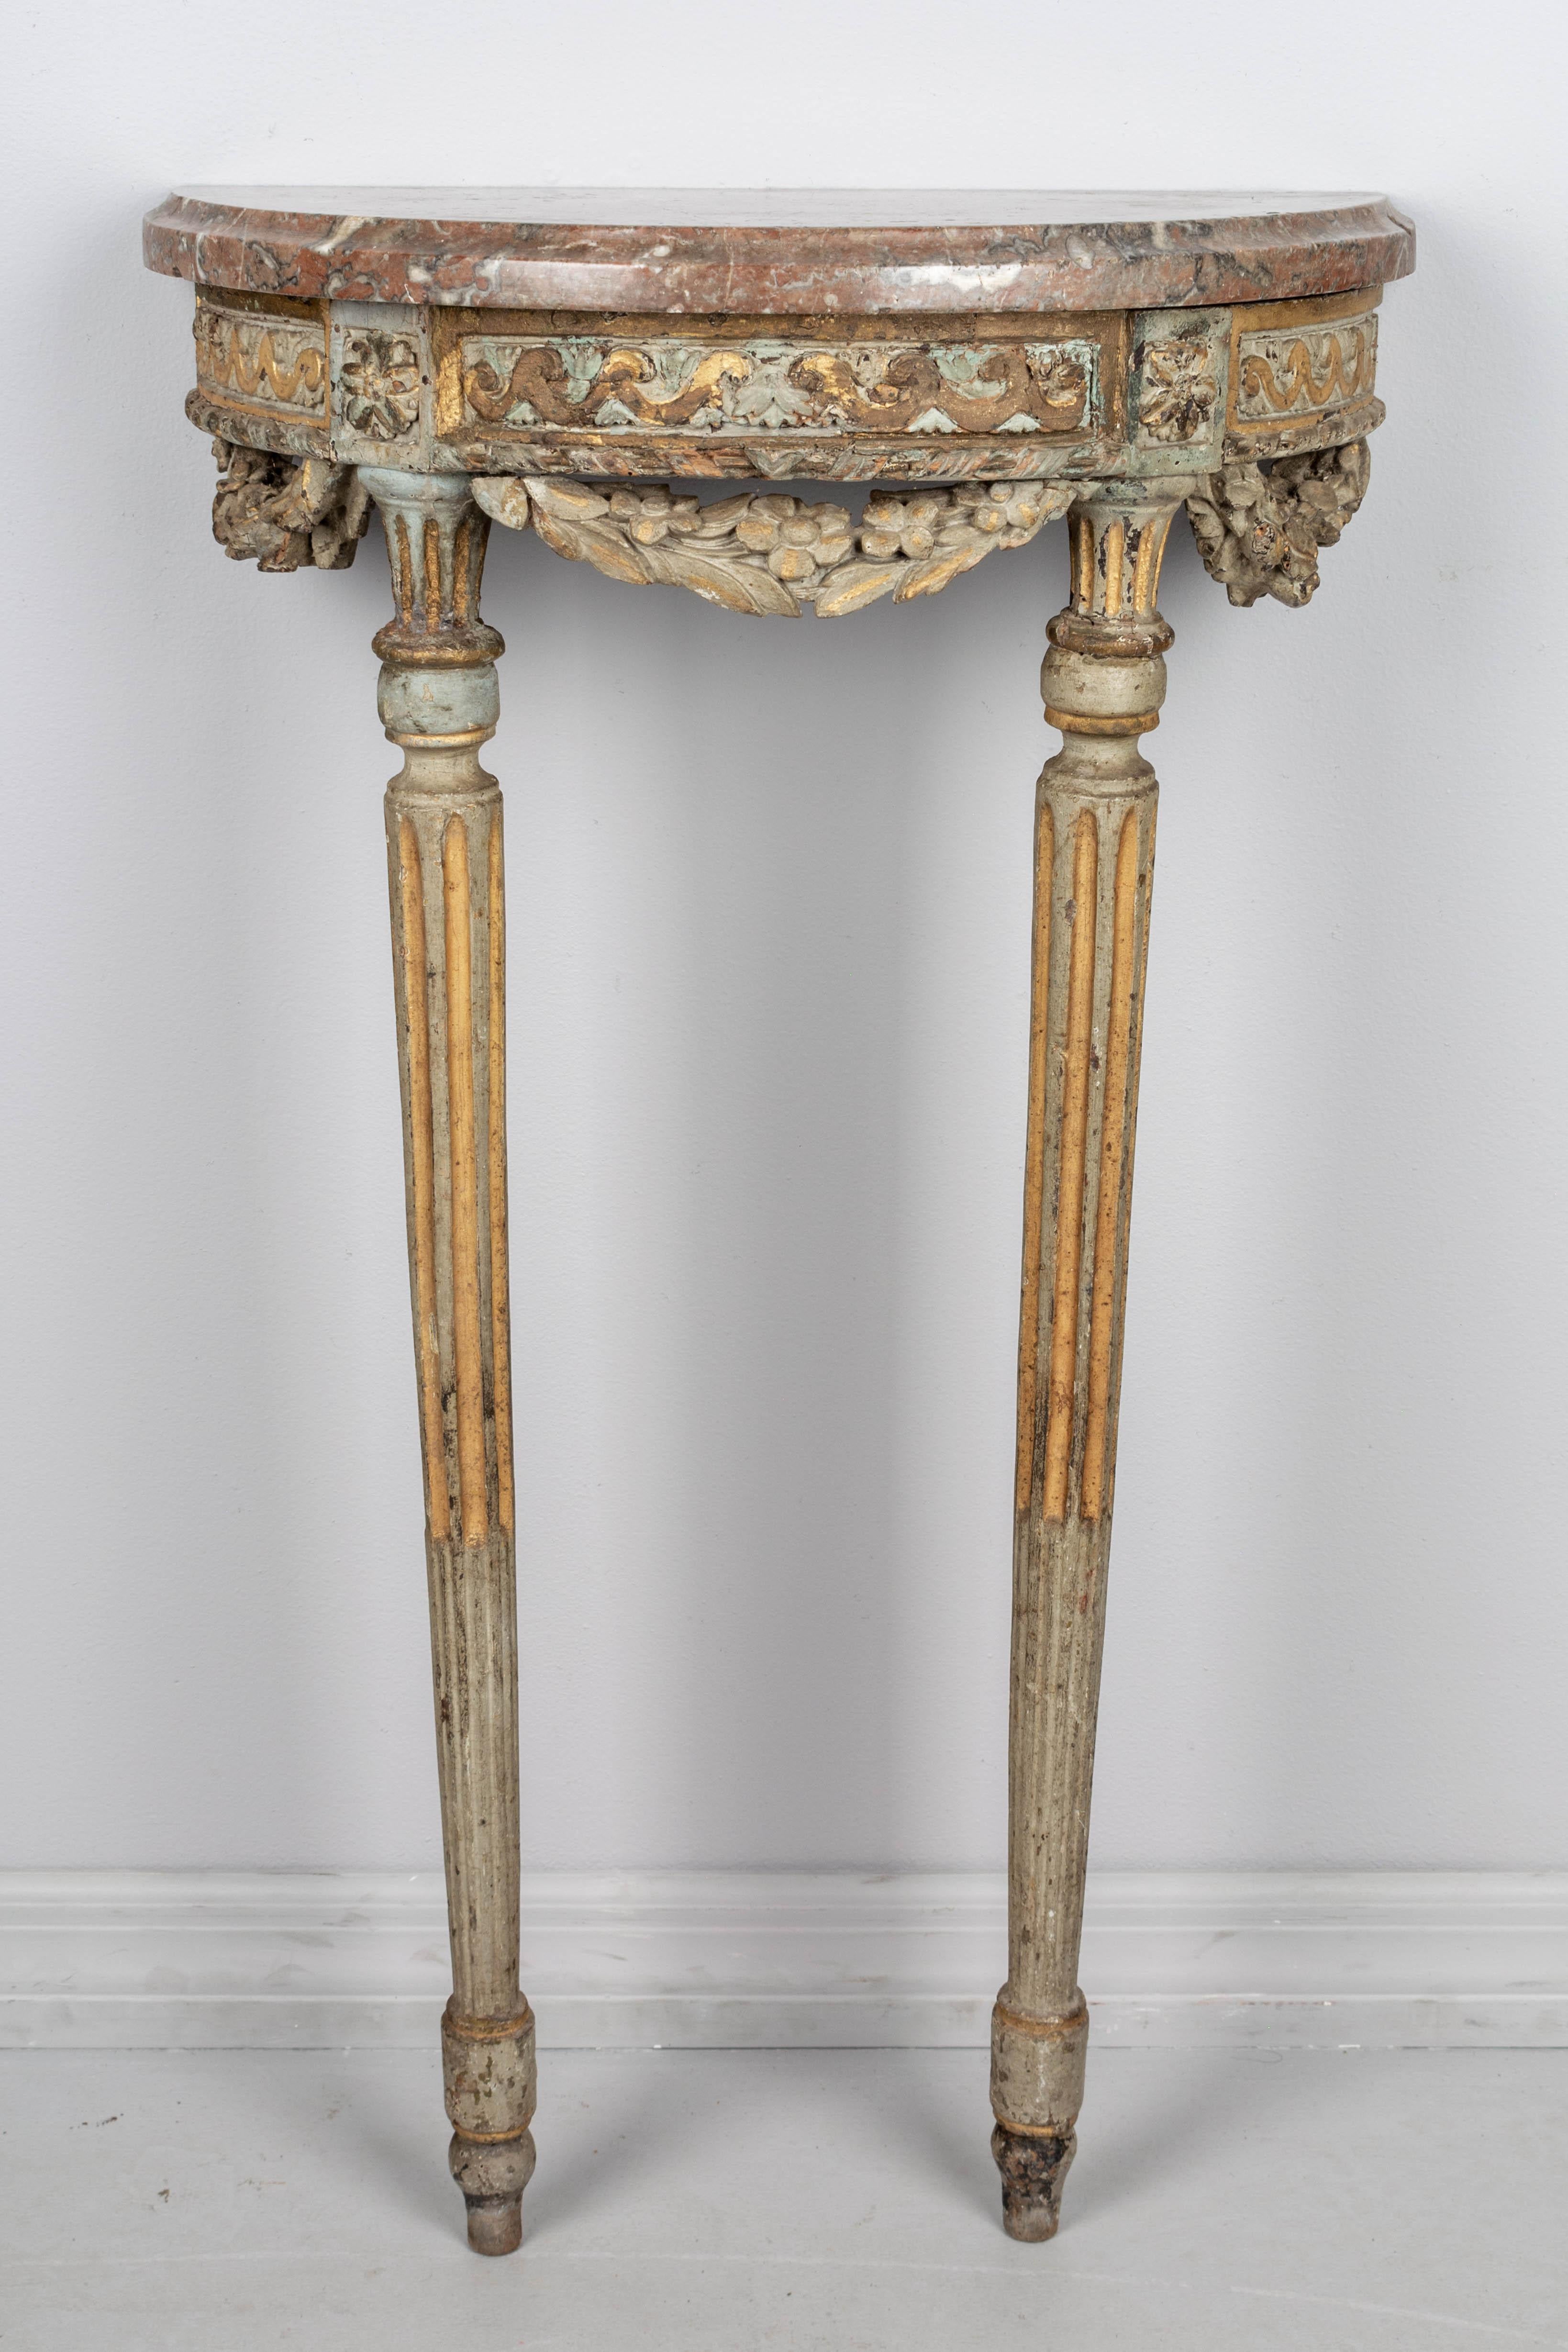 A small late 18th century Louis XVI style French polychrome painted parcel giltwood demilune console table. Beautiful verdigris patina accented with remnants of gilt. Nice sculptural form with three carved floral swags and slim fluted tapered legs.